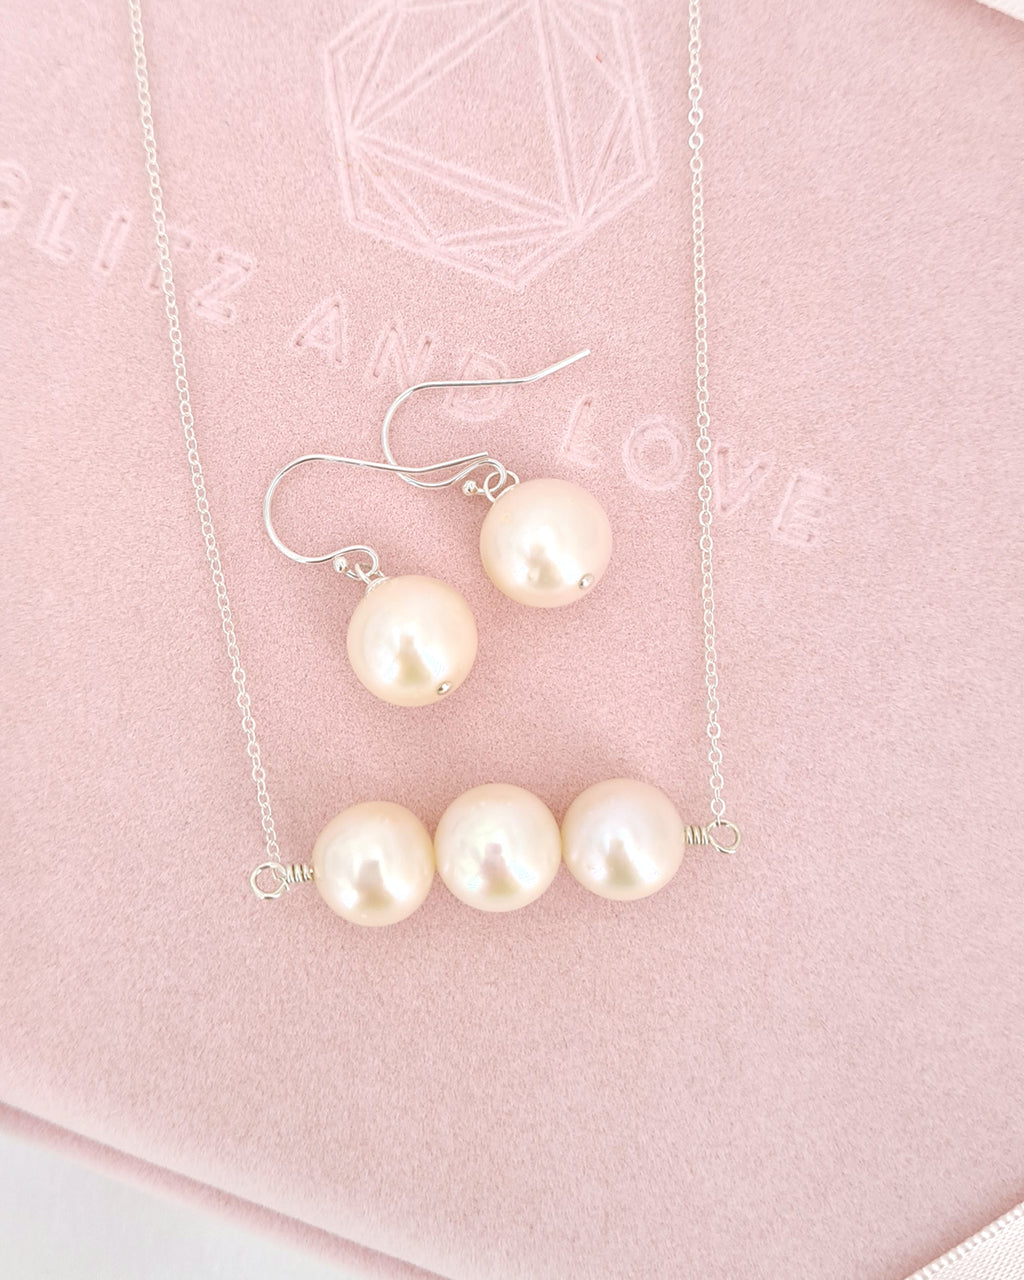 Simple Freshwater Pearl Earrings and Necklace - Silver - Wedding Bridal Jewelry for Brides and Bridesmaids | Singapore